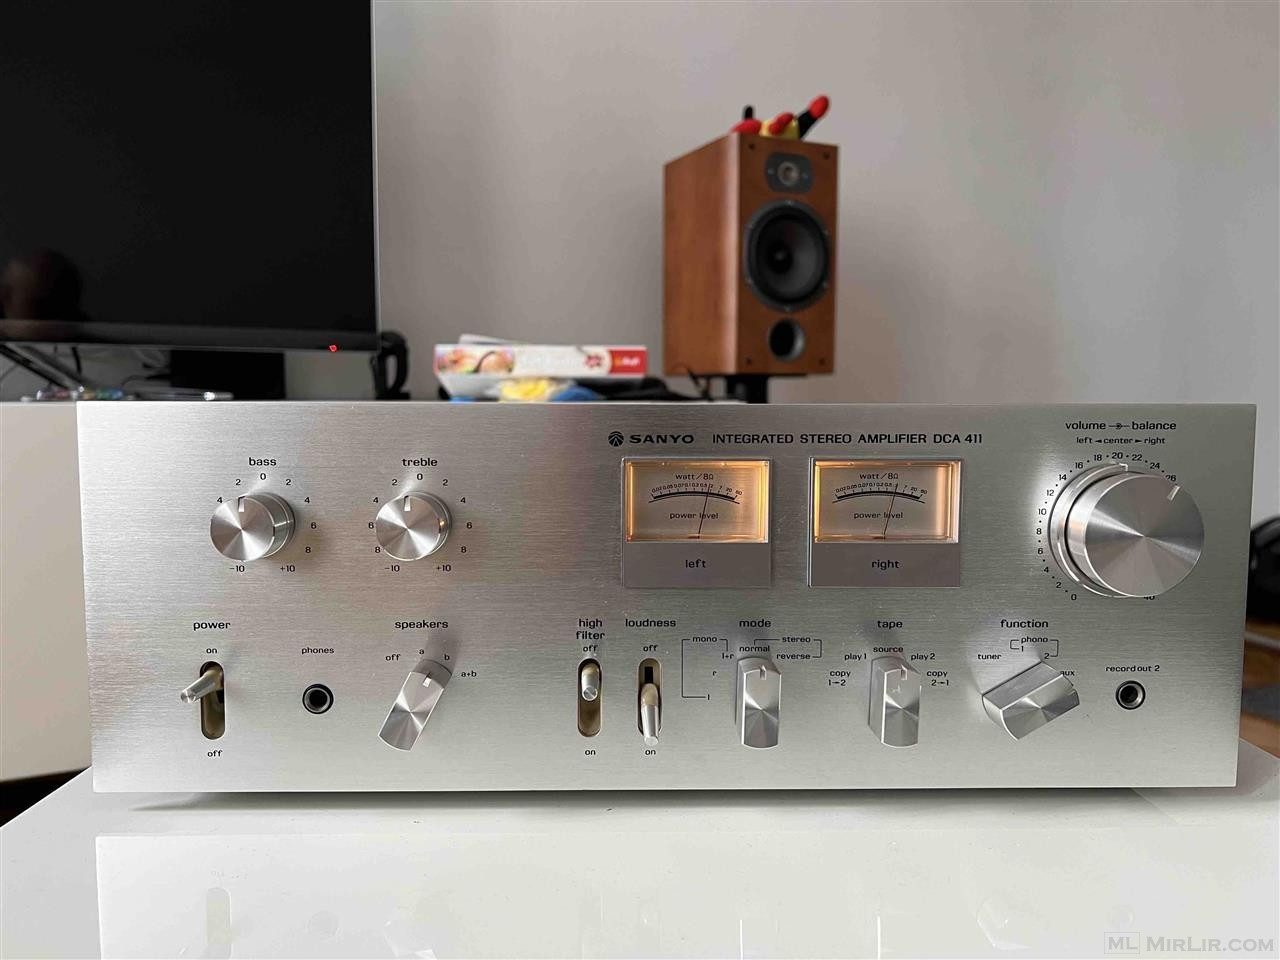 Sanyo DCA 411 Stereo Amplifier